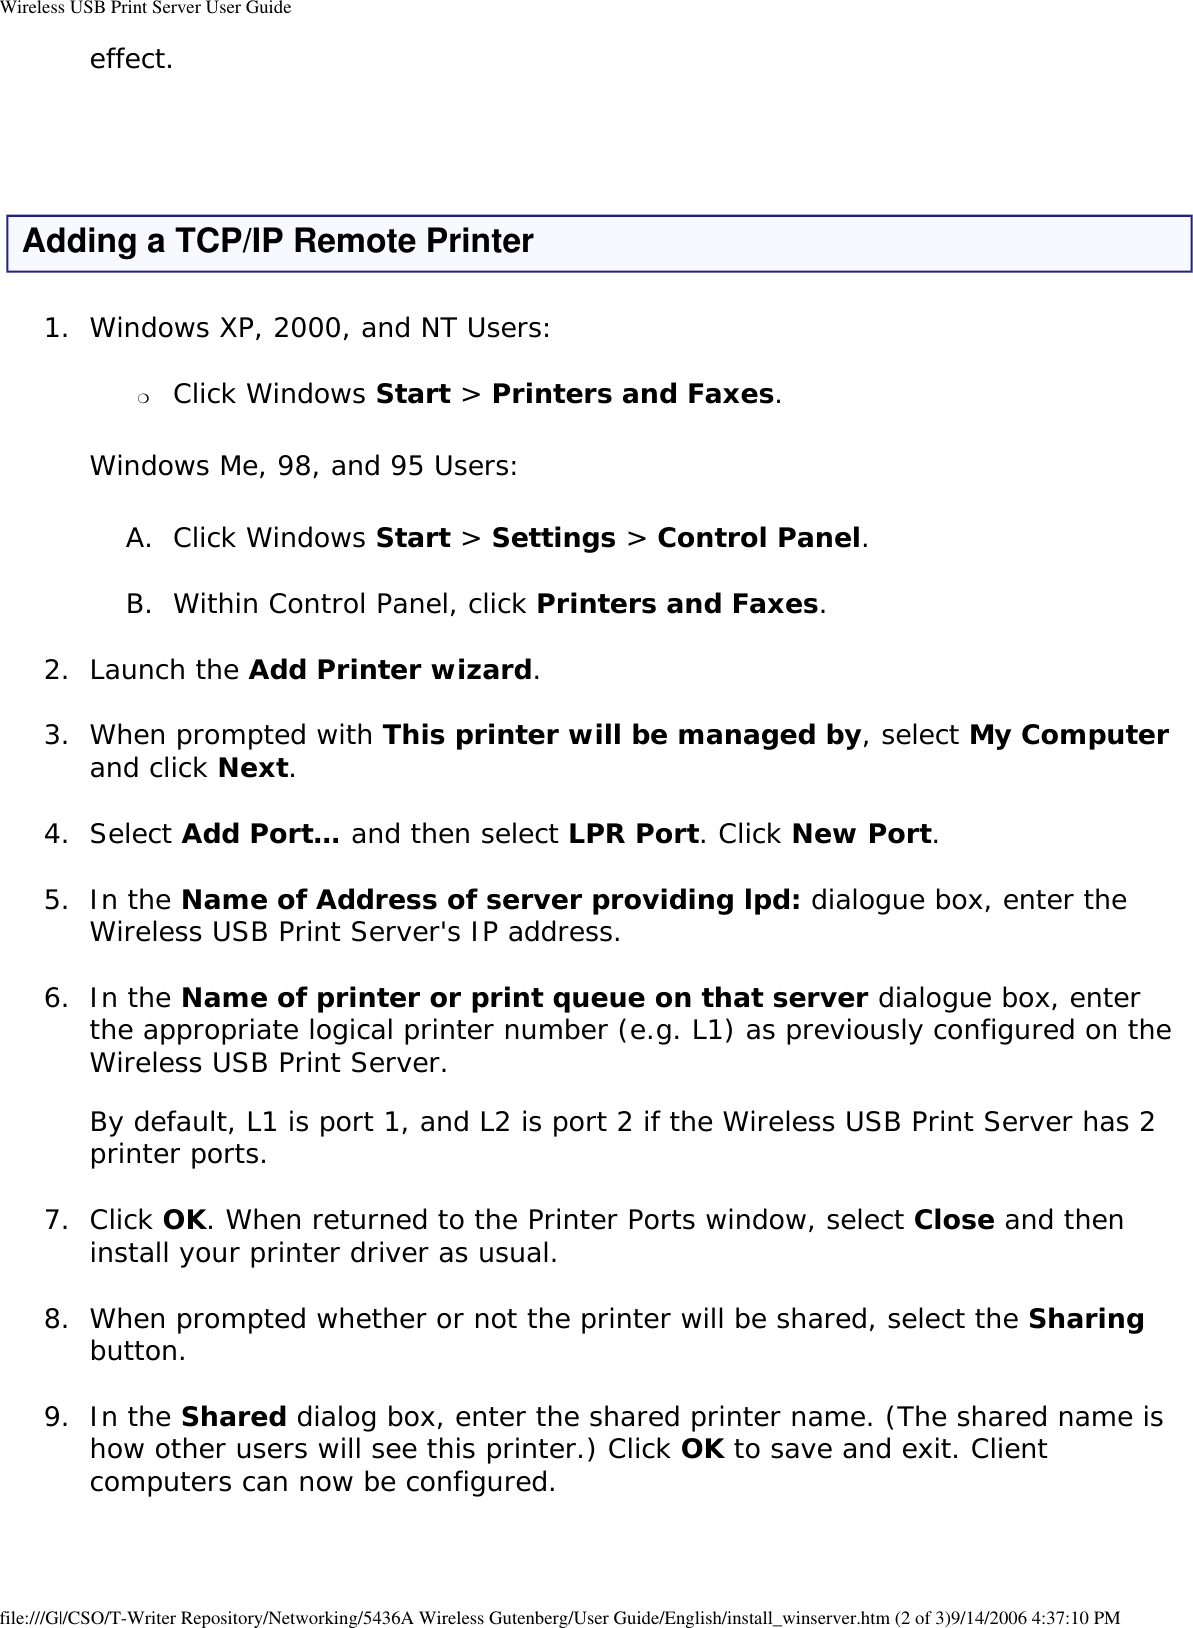 Wireless USB Print Server User Guideeffect.  Adding a TCP/IP Remote Printer1.  Windows XP, 2000, and NT Users: ❍     Click Windows Start &gt; Printers and Faxes. Windows Me, 98, and 95 Users:A.  Click Windows Start &gt; Settings &gt; Control Panel. B.  Within Control Panel, click Printers and Faxes. 2.  Launch the Add Printer wizard. 3.  When prompted with This printer will be managed by, select My Computer and click Next. 4.  Select Add Port… and then select LPR Port. Click New Port. 5.  In the Name of Address of server providing lpd: dialogue box, enter the Wireless USB Print Server&apos;s IP address. 6.  In the Name of printer or print queue on that server dialogue box, enter the appropriate logical printer number (e.g. L1) as previously configured on the Wireless USB Print Server.  By default, L1 is port 1, and L2 is port 2 if the Wireless USB Print Server has 2 printer ports. 7.  Click OK. When returned to the Printer Ports window, select Close and then install your printer driver as usual. 8.  When prompted whether or not the printer will be shared, select the Sharing button. 9.  In the Shared dialog box, enter the shared printer name. (The shared name is how other users will see this printer.) Click OK to save and exit. Client computers can now be configured. file:///G|/CSO/T-Writer Repository/Networking/5436A Wireless Gutenberg/User Guide/English/install_winserver.htm (2 of 3)9/14/2006 4:37:10 PM